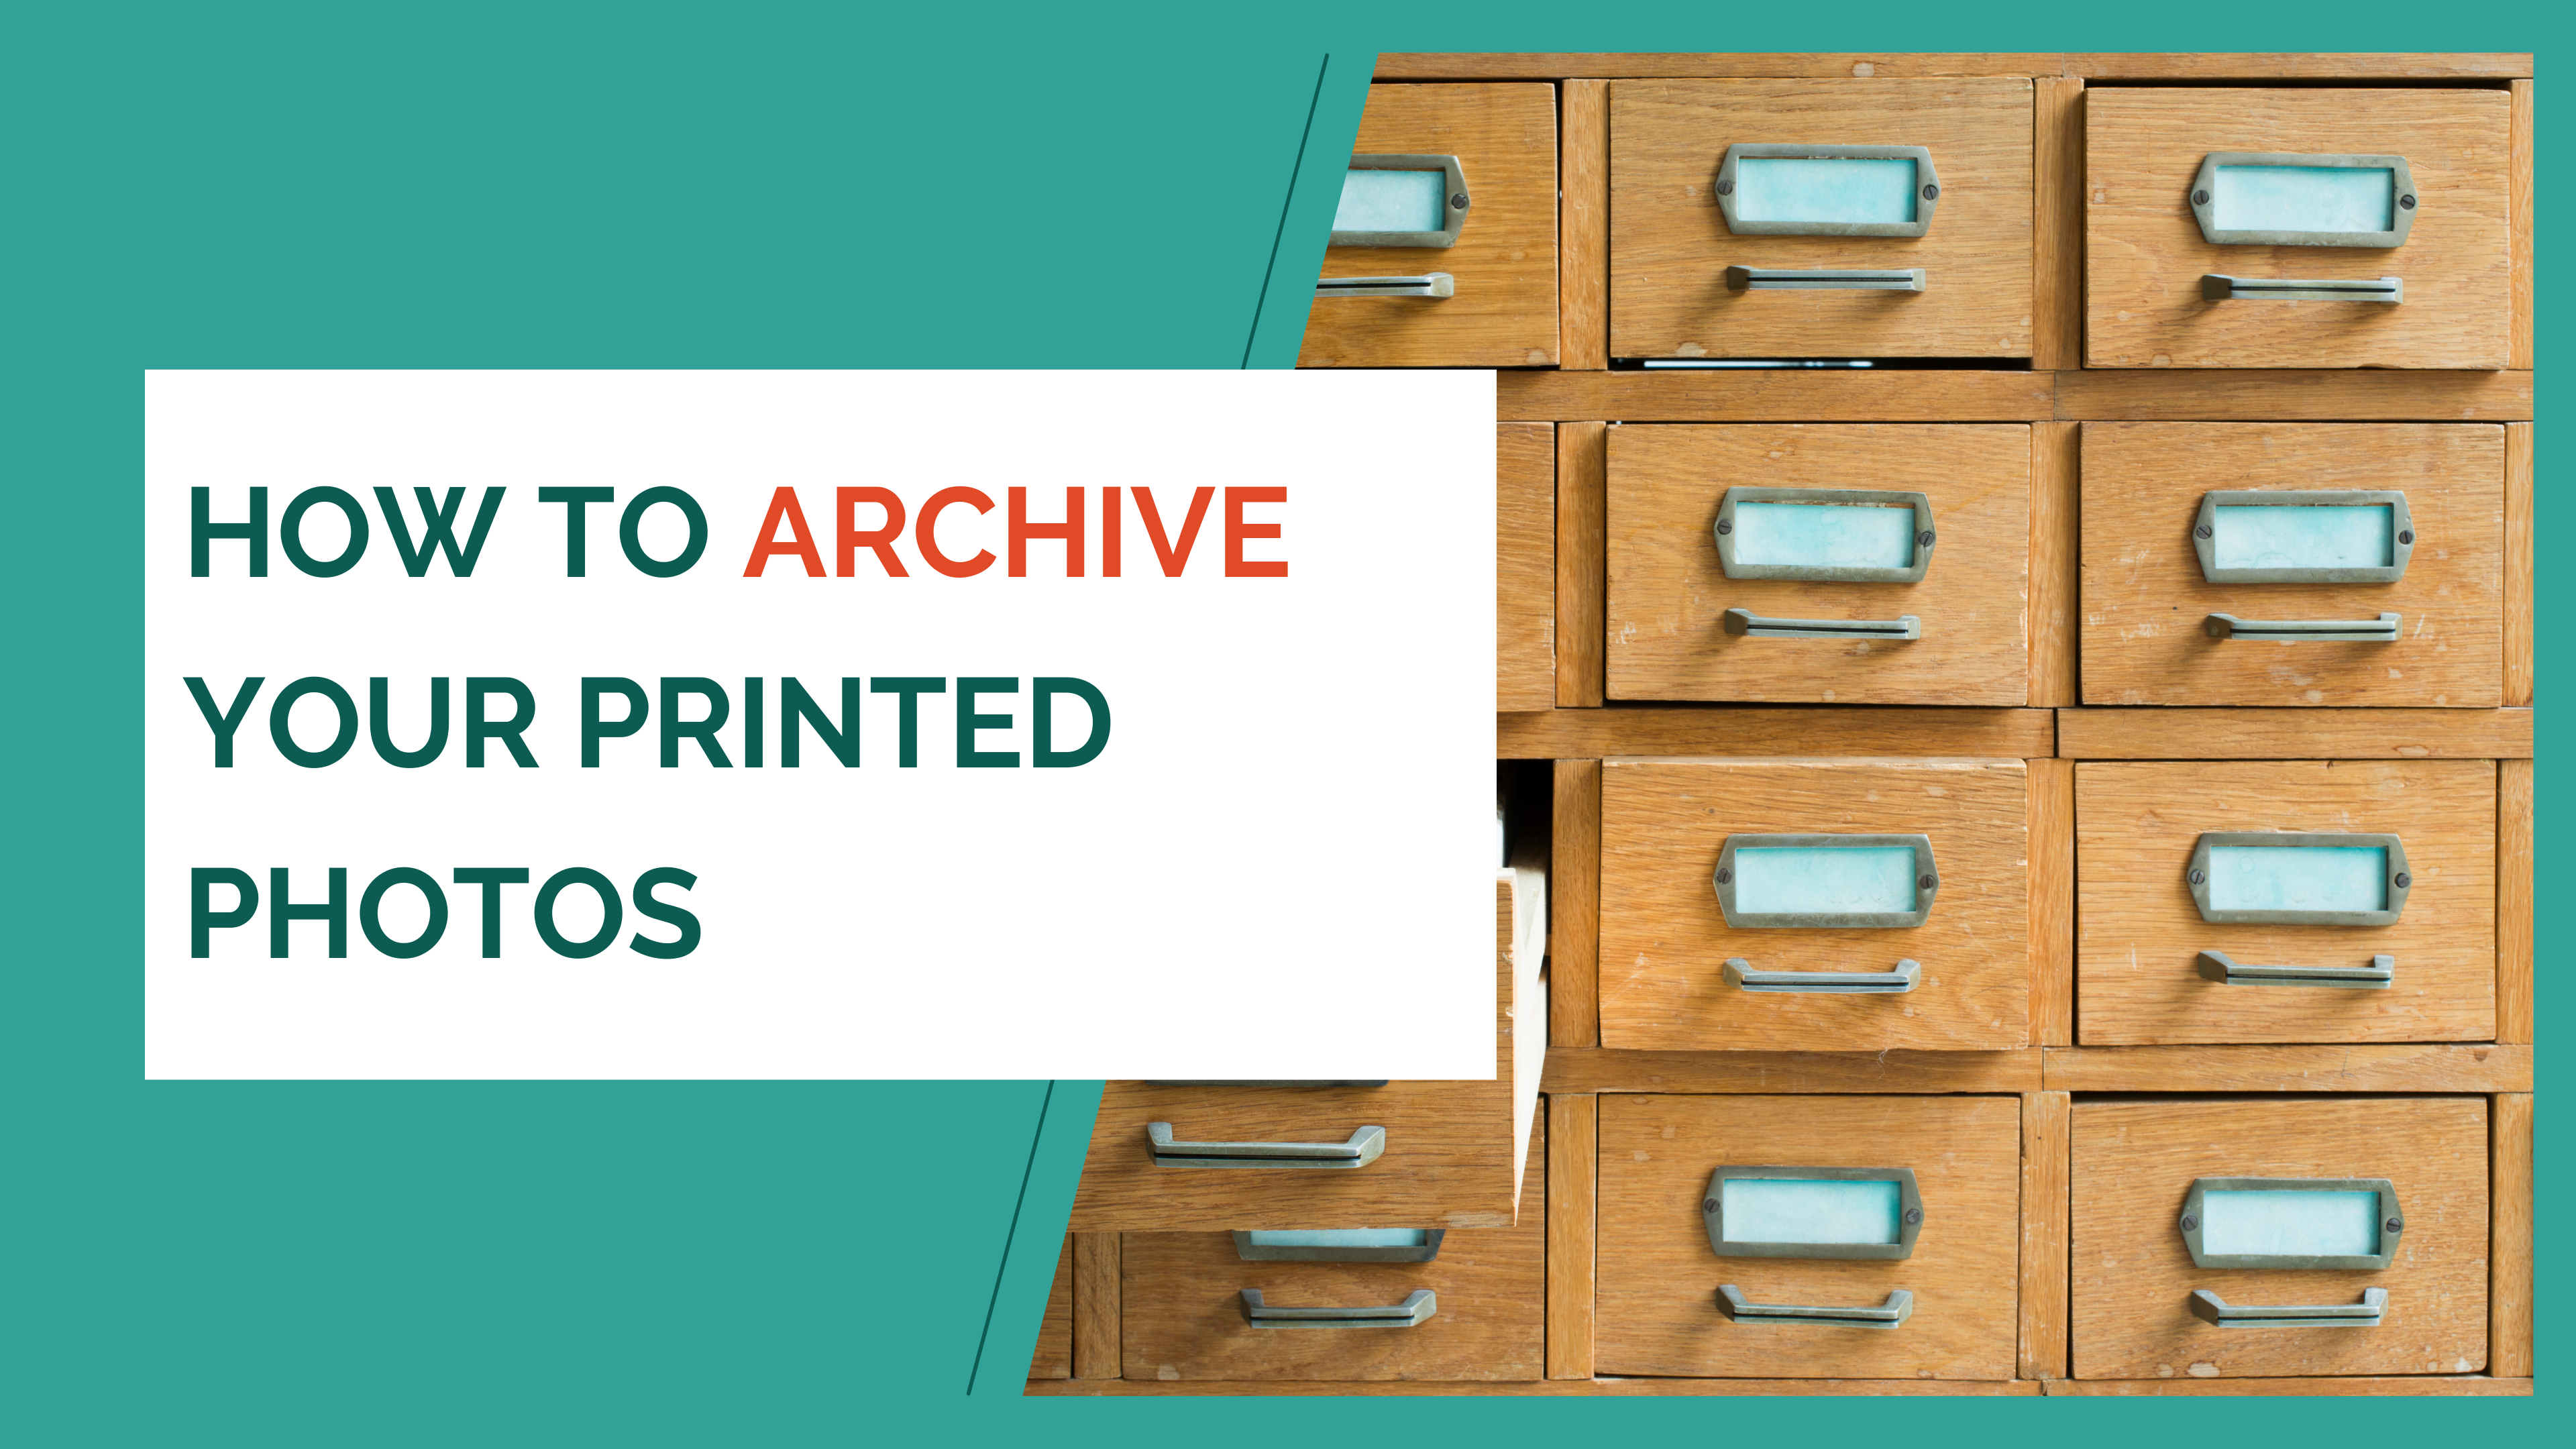 How to archive your printed photos